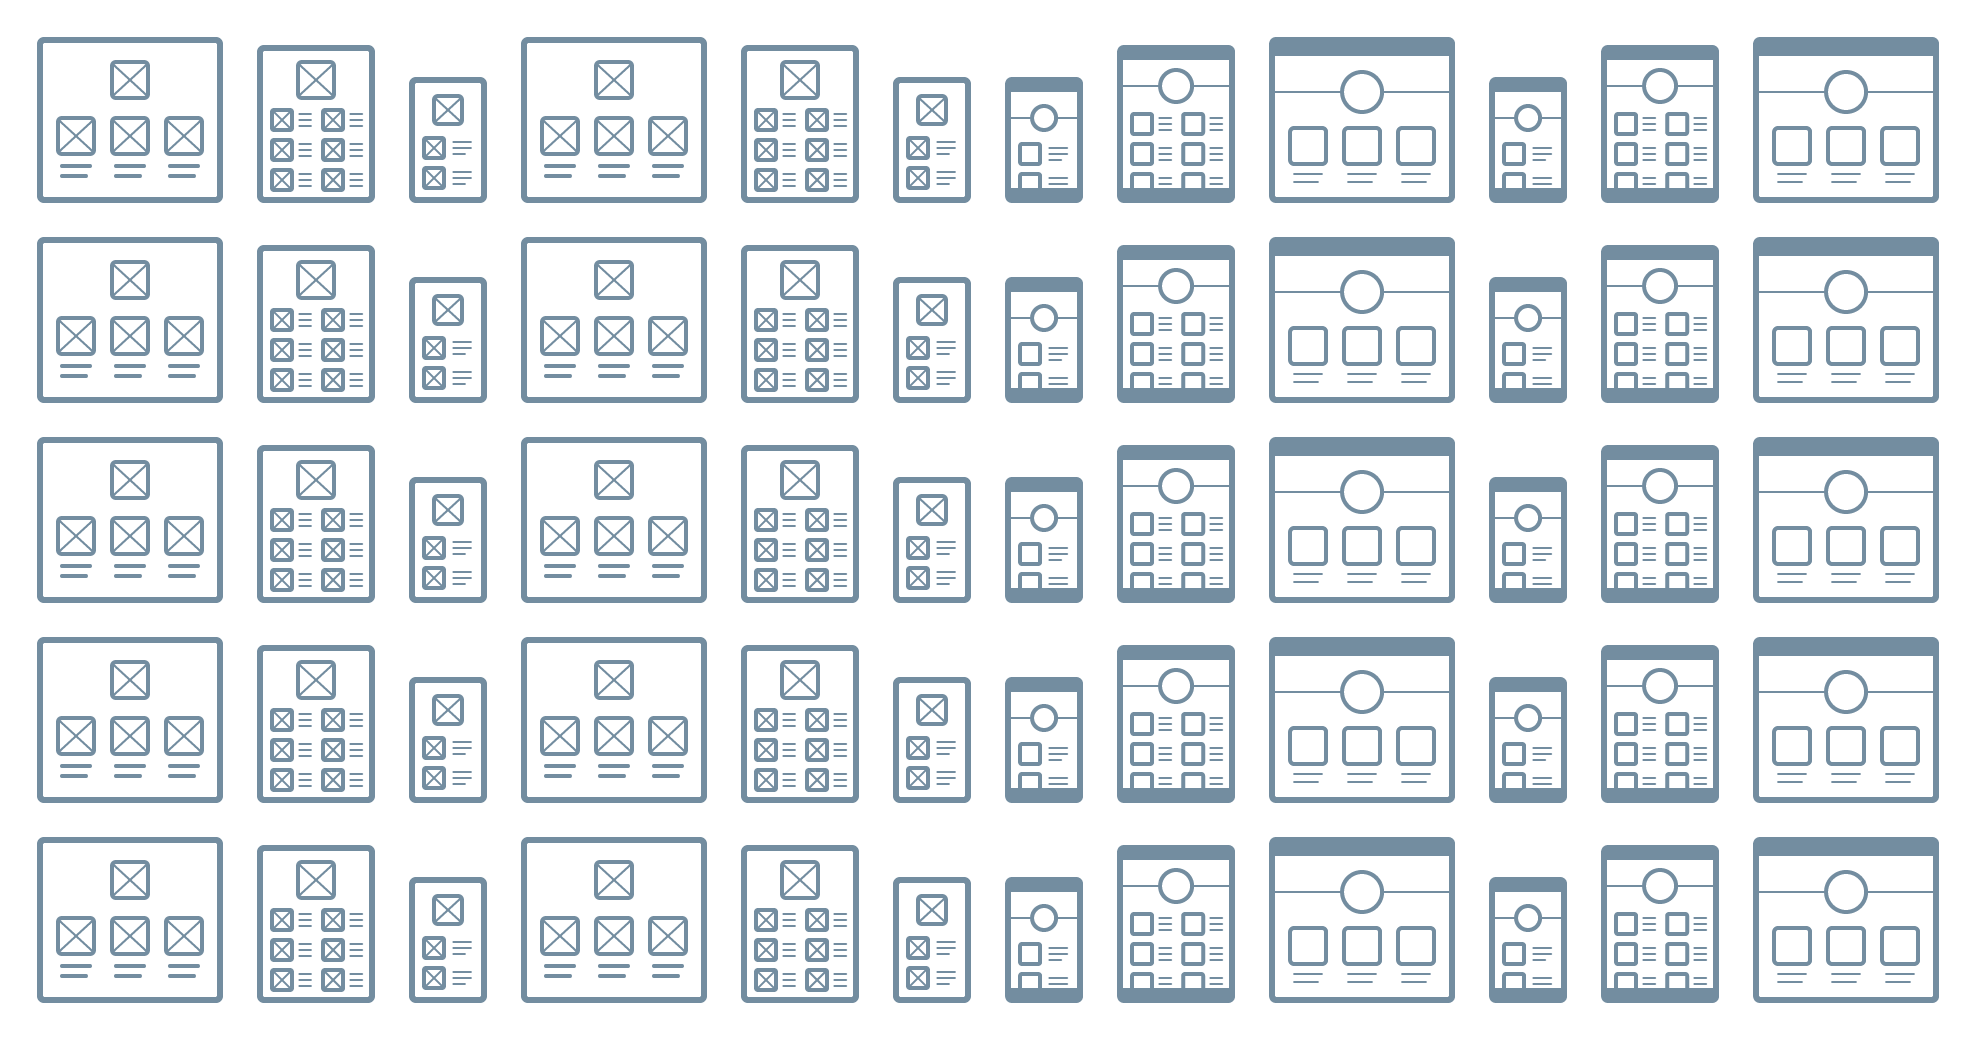 The middle of the previous image has been replaced with another full set of wireframes and mockups. The entire image is now full of wireframe and mockup icons